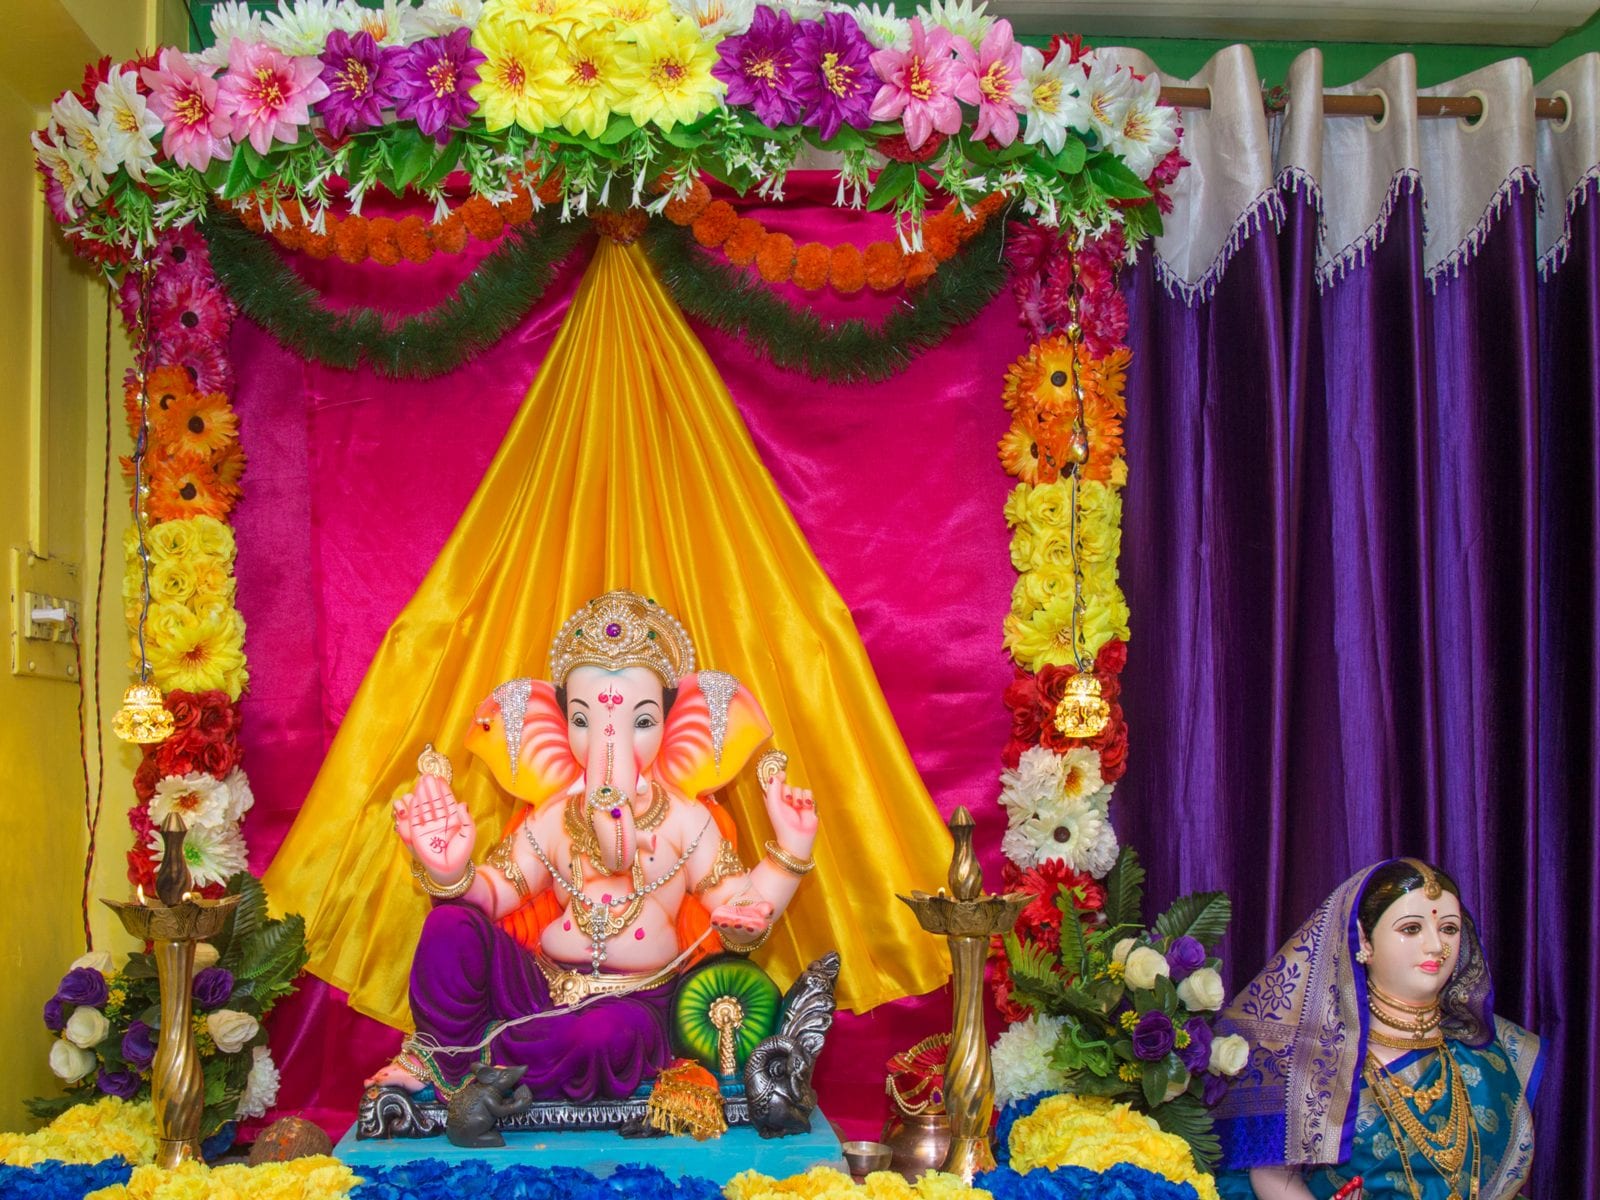 Ganesh Chaturthi 2022: Here are some Easy Ganpati Decoration Ideas for Home